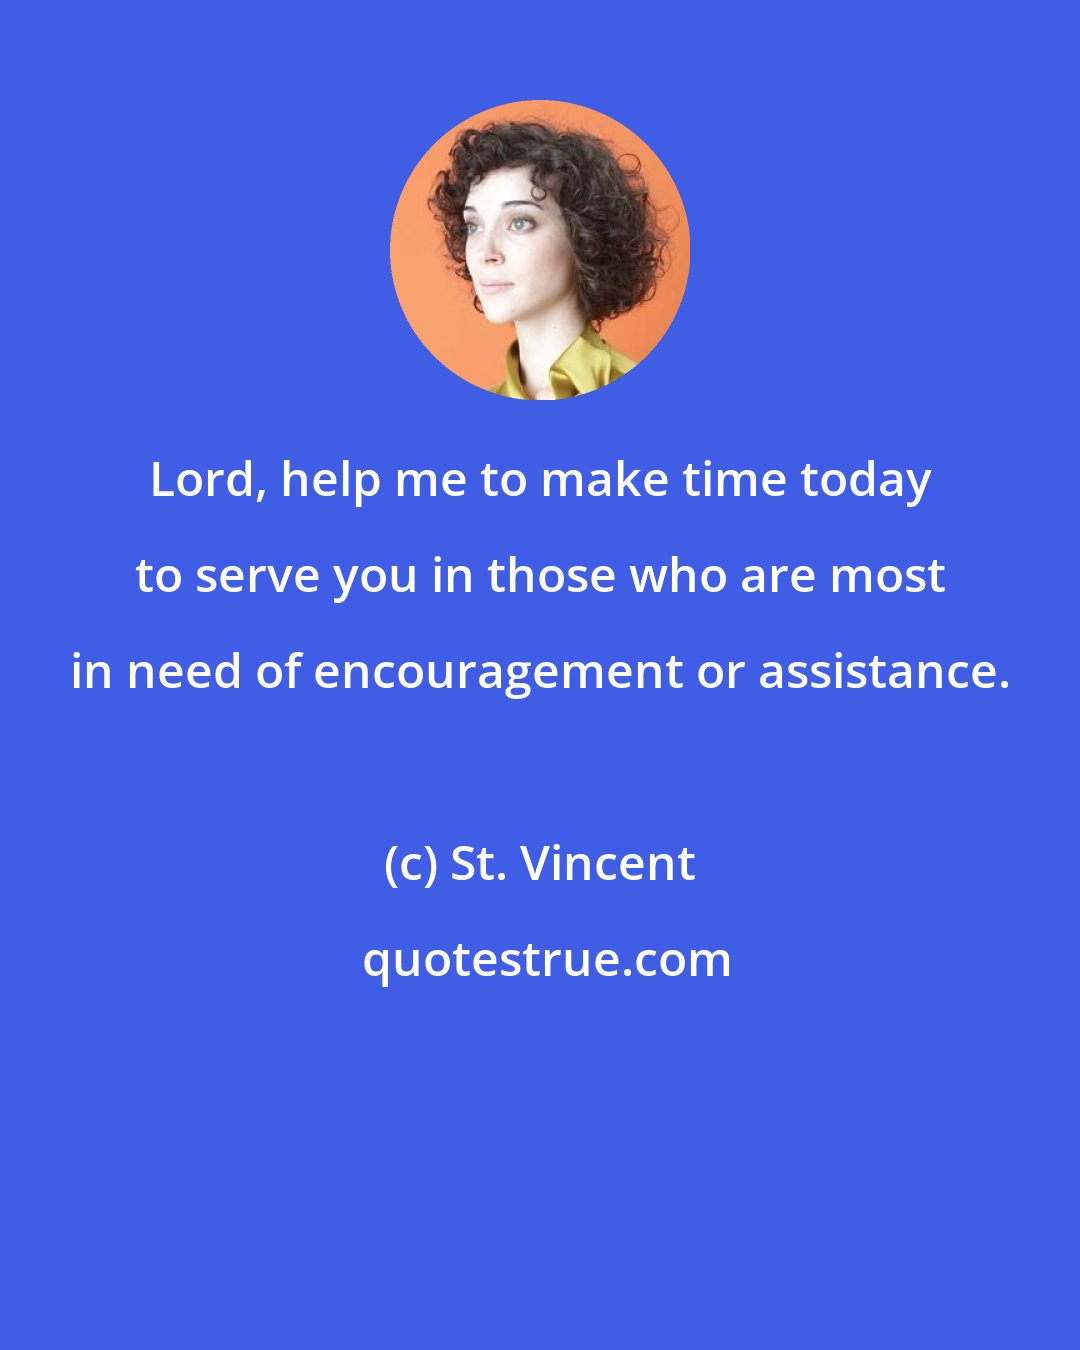 St. Vincent: Lord, help me to make time today to serve you in those who are most in need of encouragement or assistance.